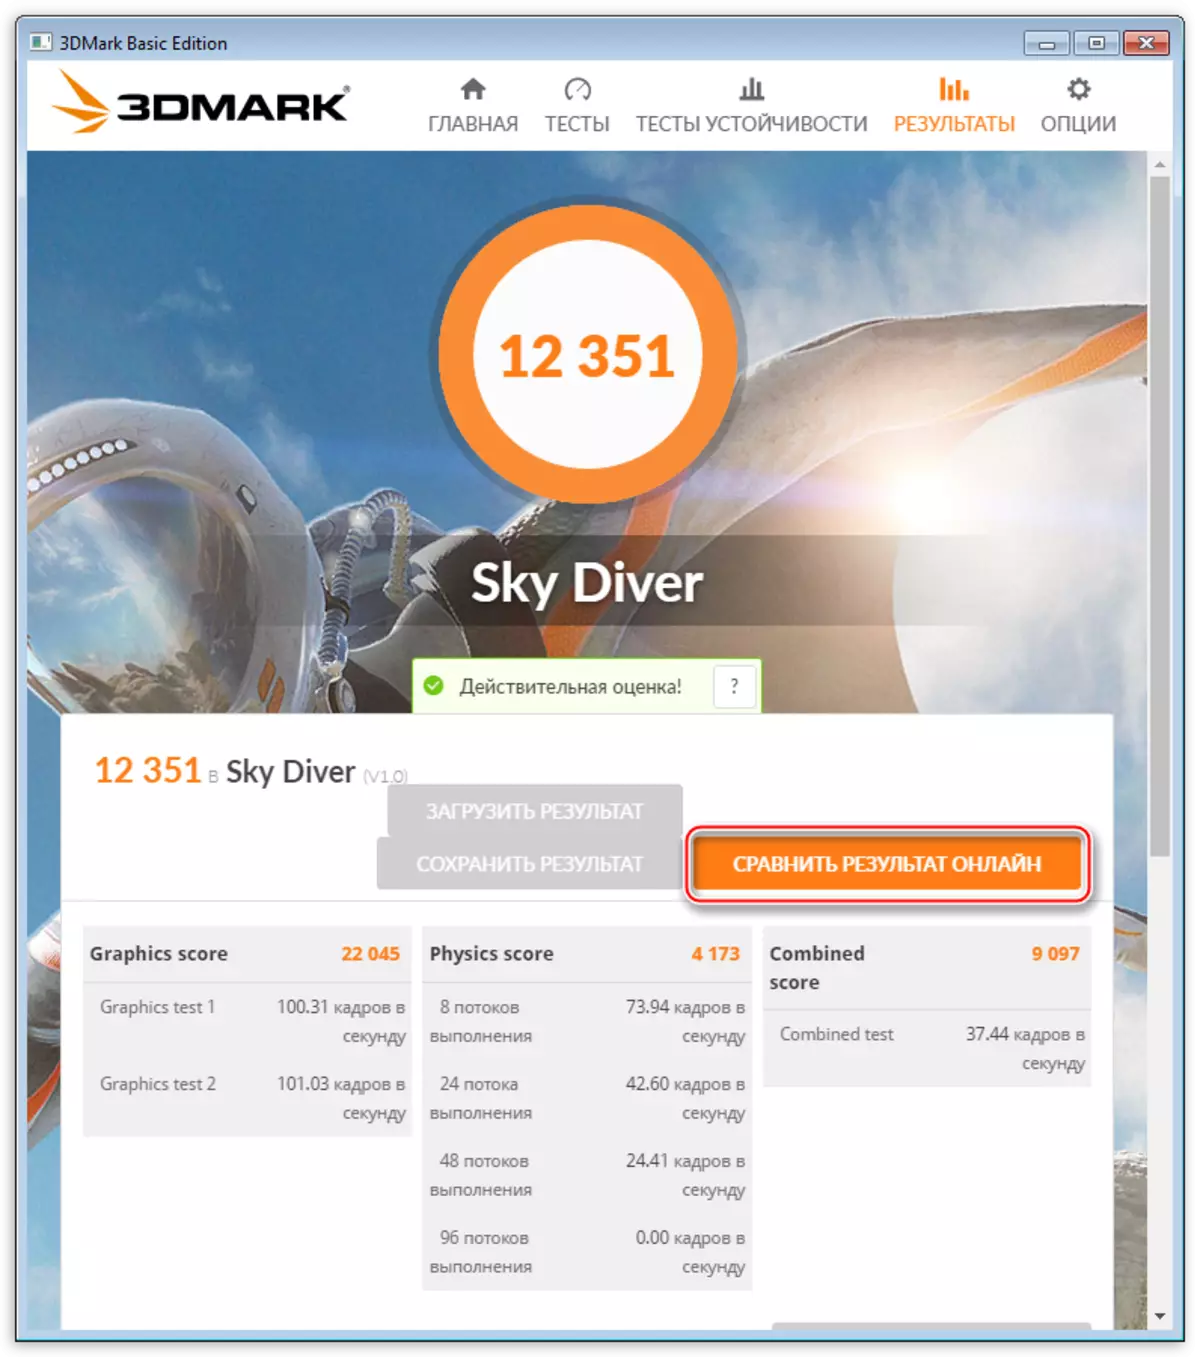 Go to the comparison page of system test results in the 3DMark program from Futuremark